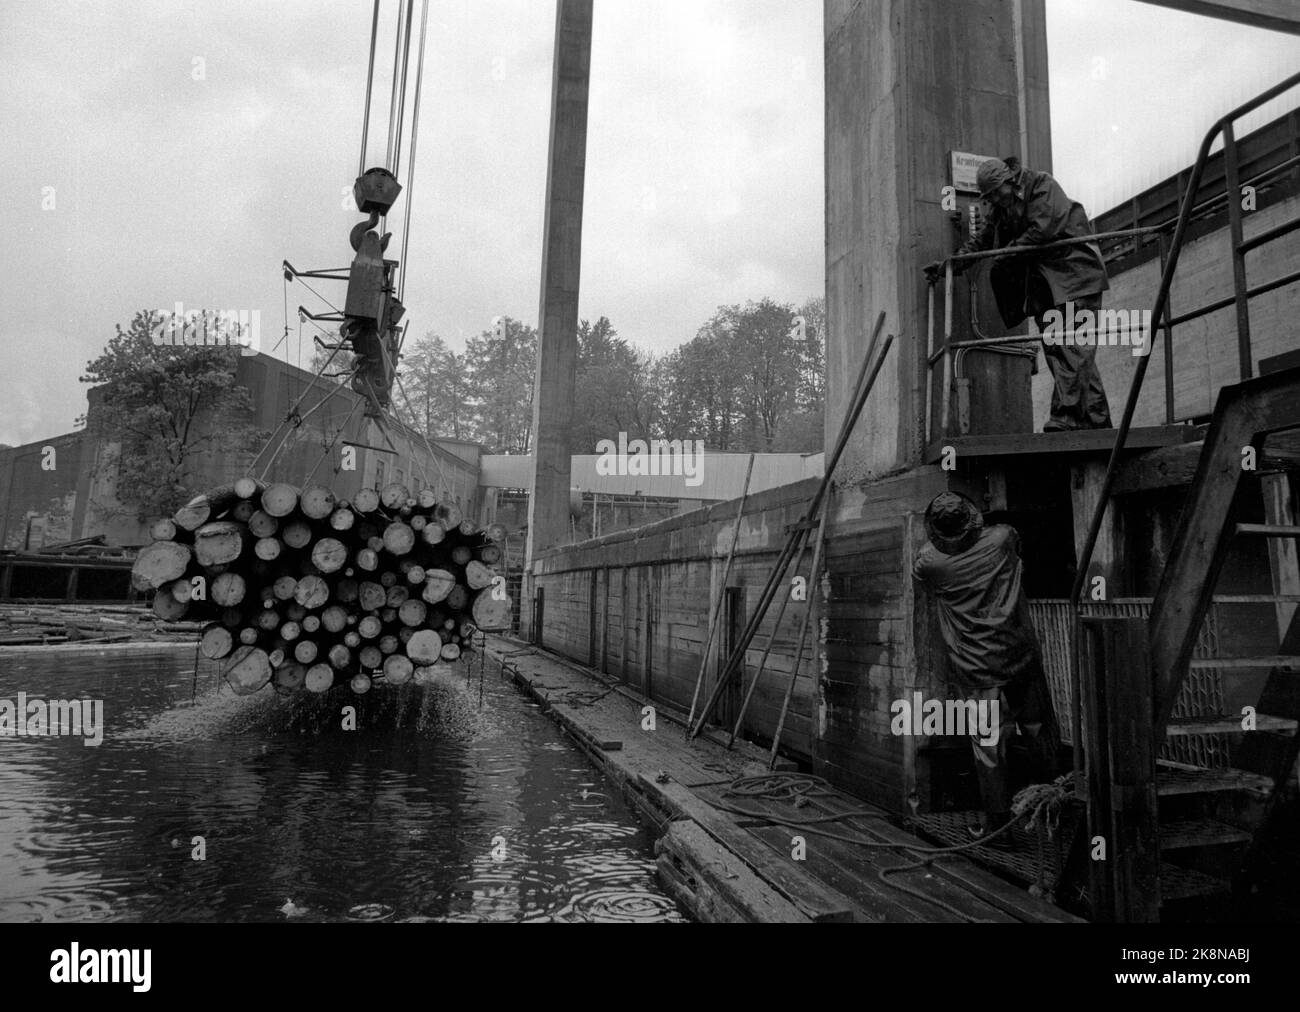 Skien May 1969. Discontent among the workers in Union Bruk in Skien, after the general meeting decided to allocate shareholders NOK 10 million to be paid tax -free over five years. The employees thought the money could have gone to rectify the company and give them safer working conditions. For example, this tap that lifts logs. Had it reached further into the river, the workers could easily and less dangerously got the timber into the factory. Photo: Ervik / Current / NTB Stock Photo